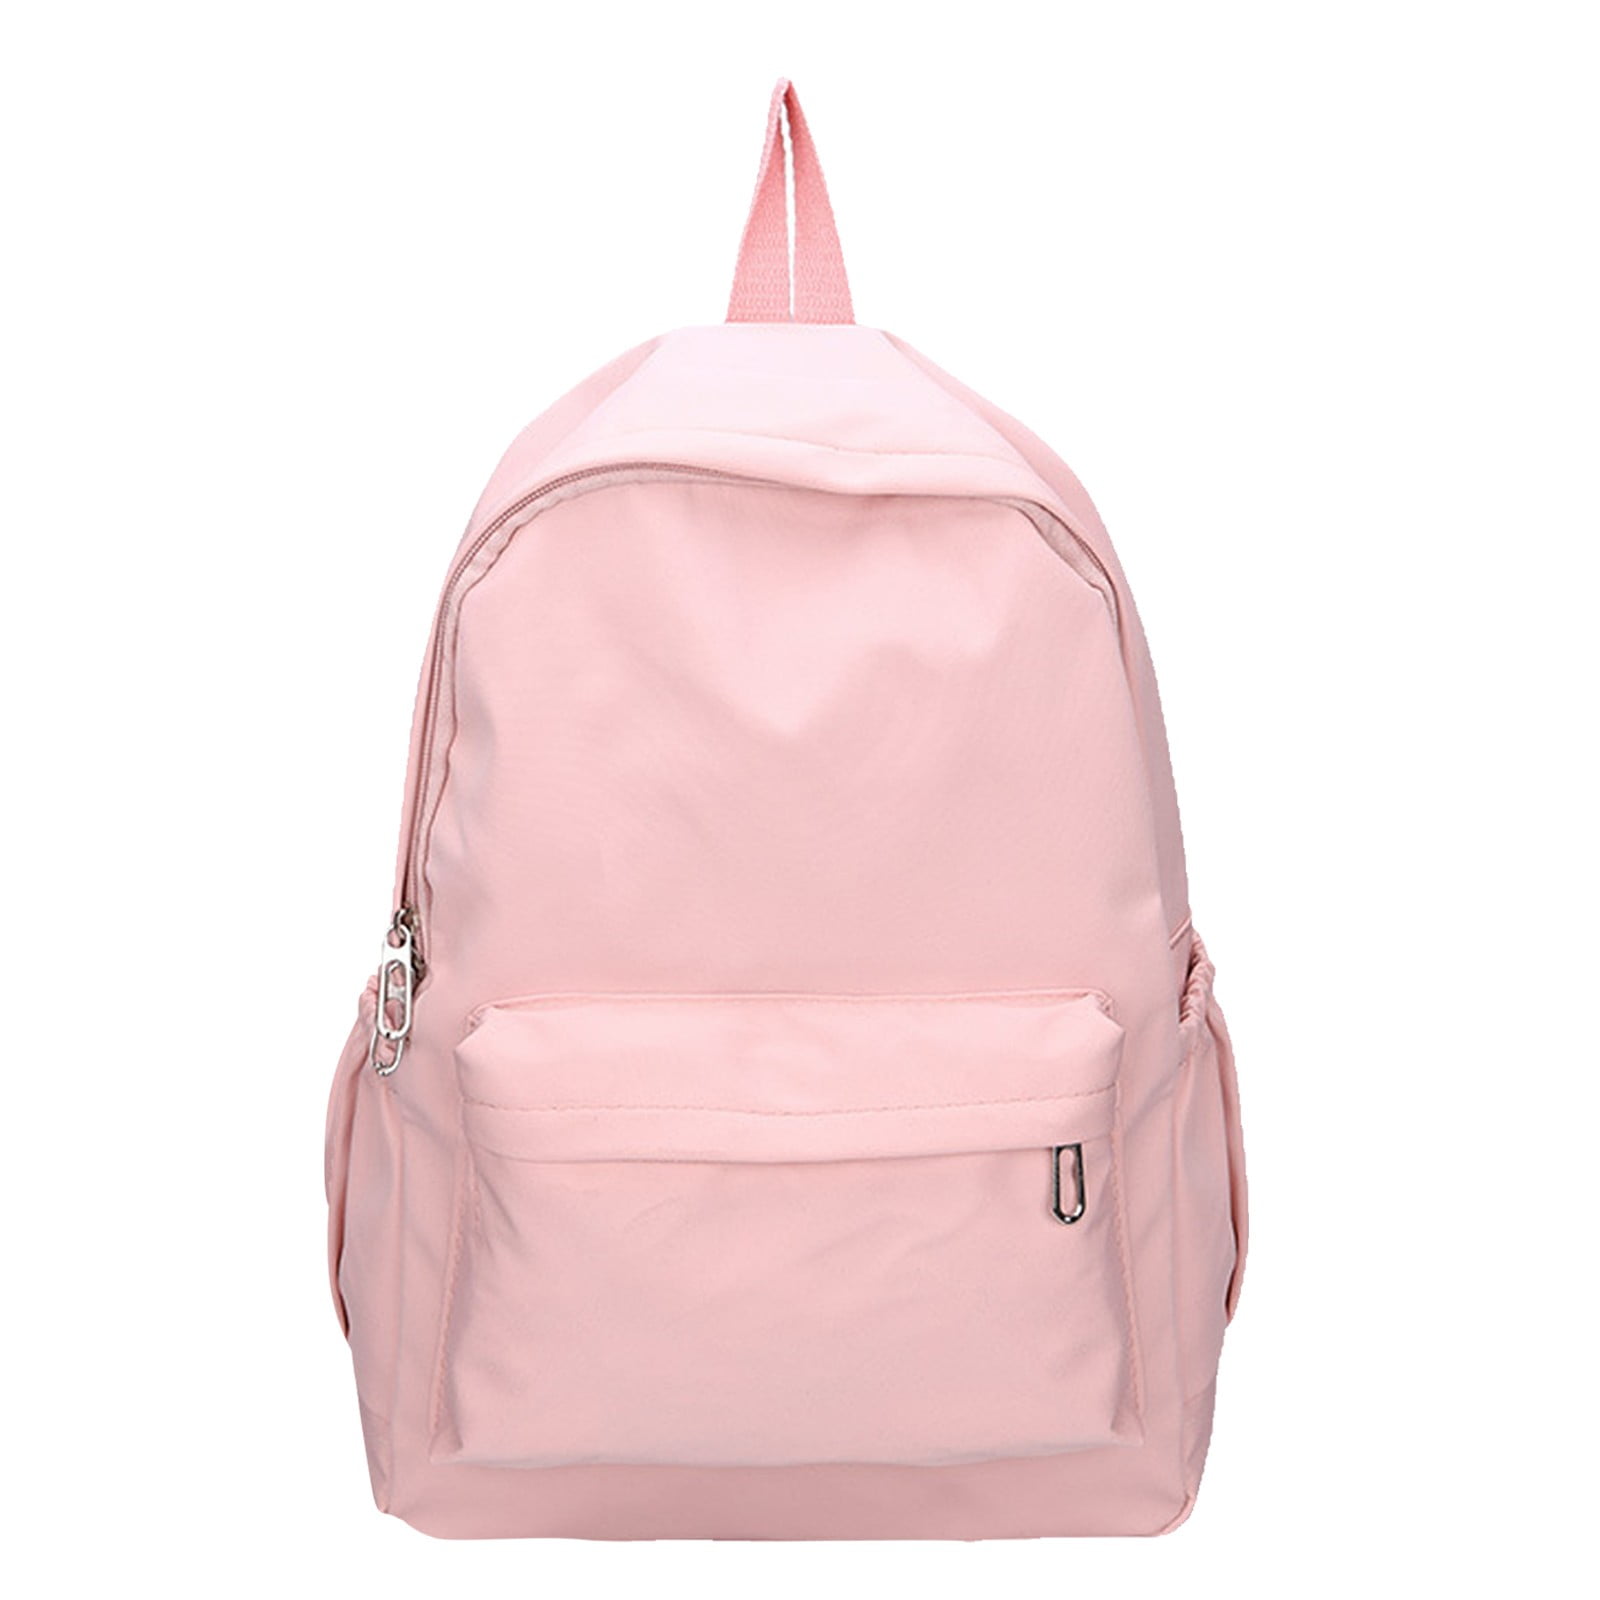 Back To School Supplies Student Schoolbag Large Capacity Outdoor Girls ...